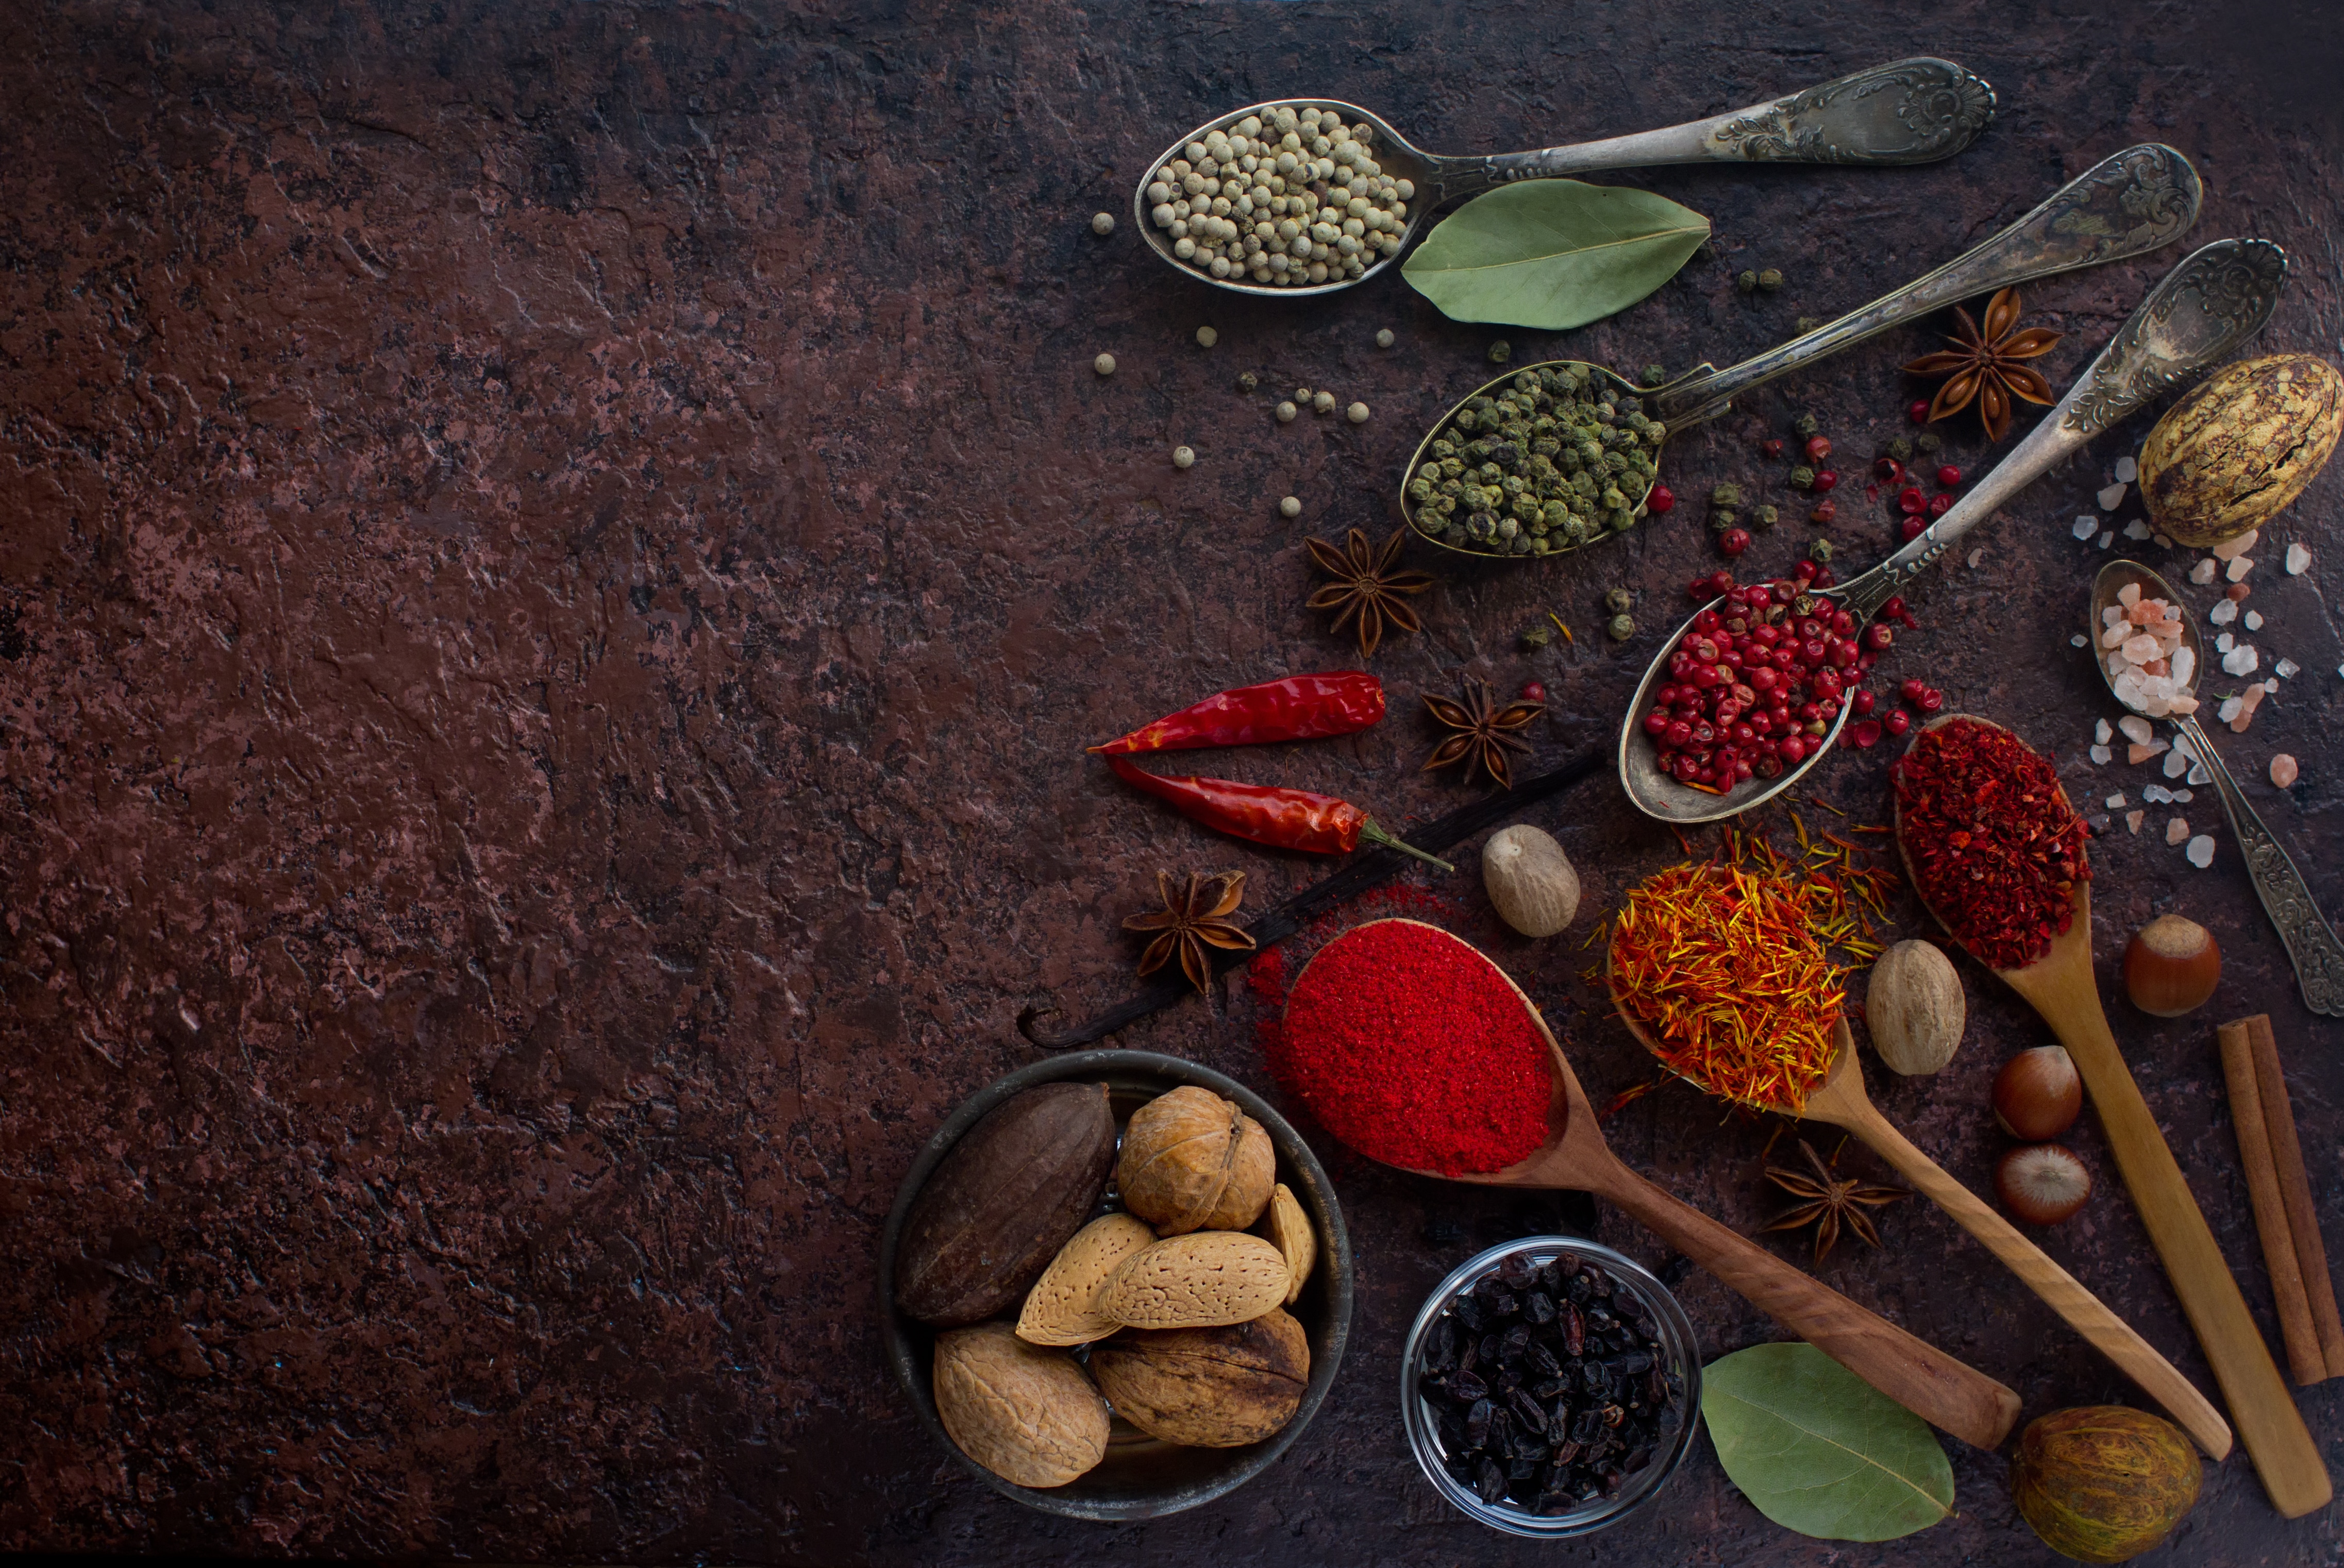 Spoons-of-Different-Spices-dark-background.jpg